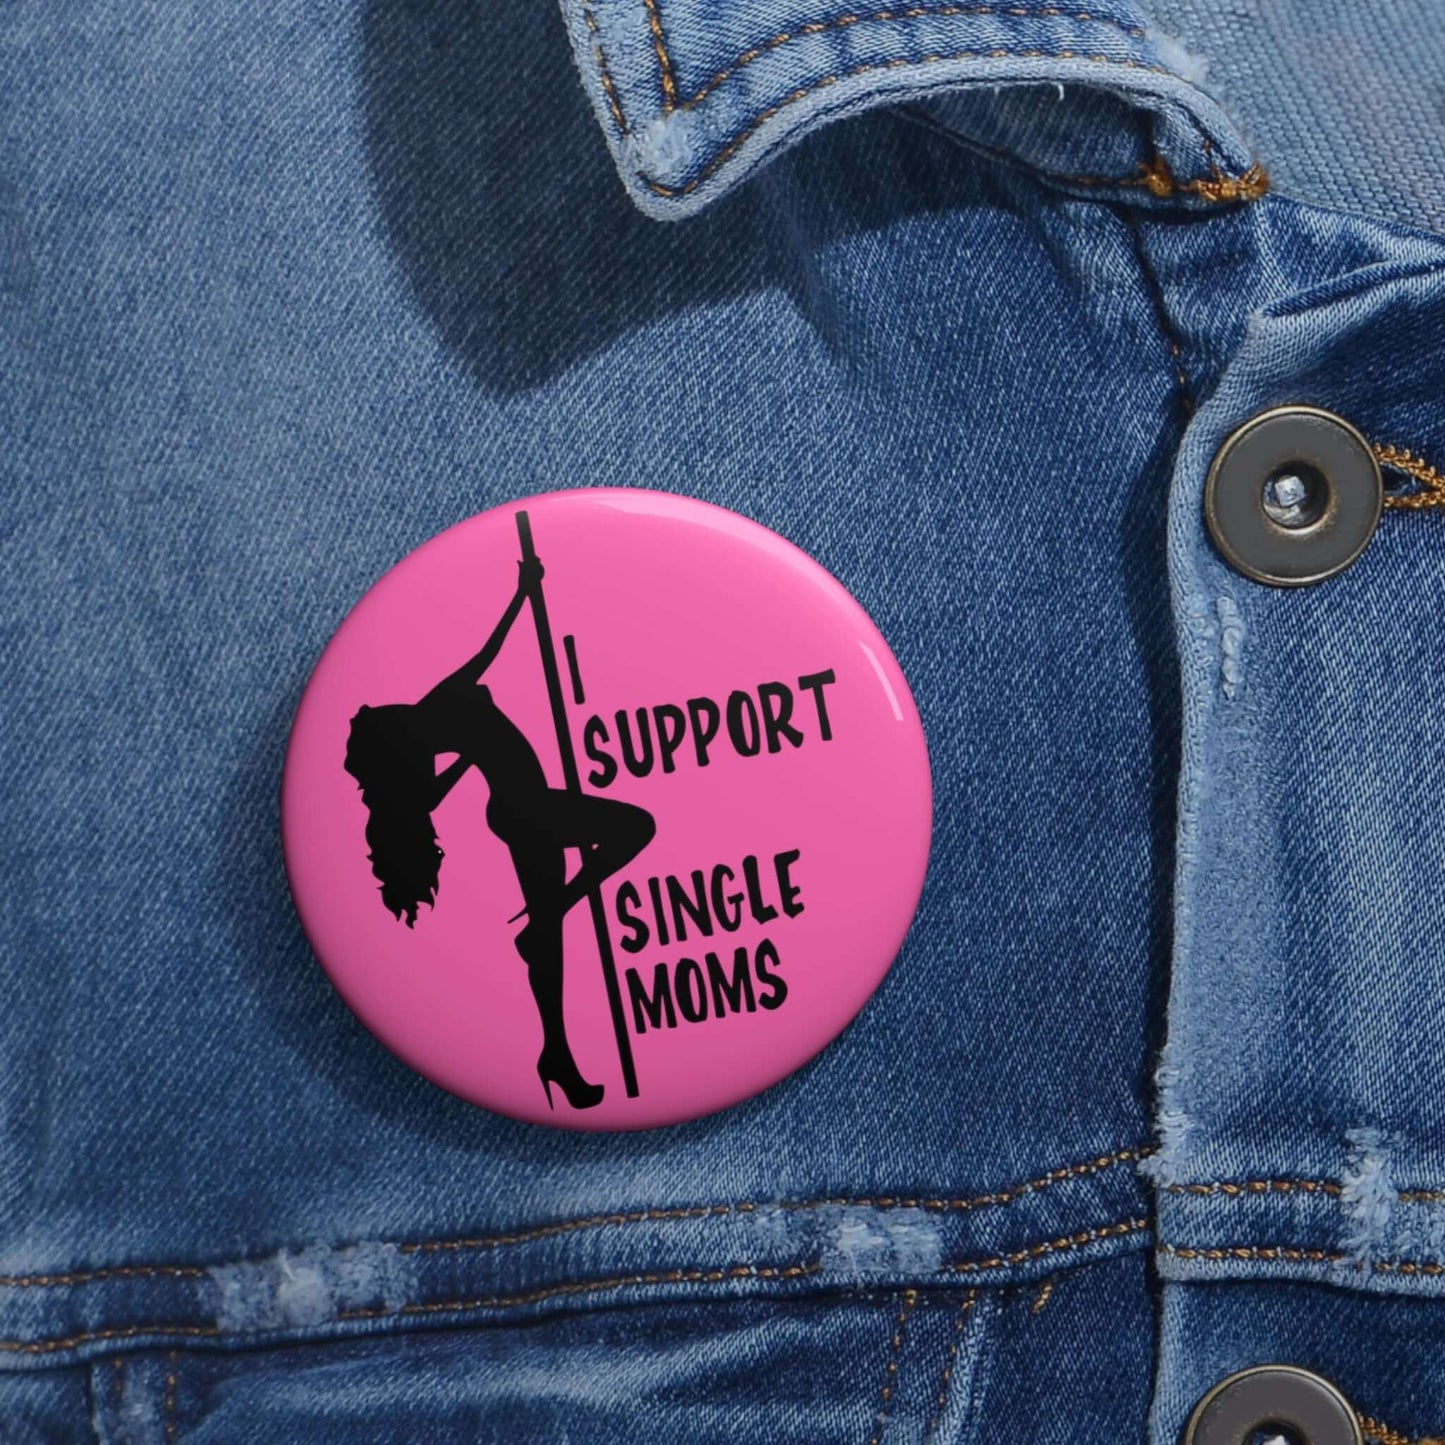 I support single moms pinback button